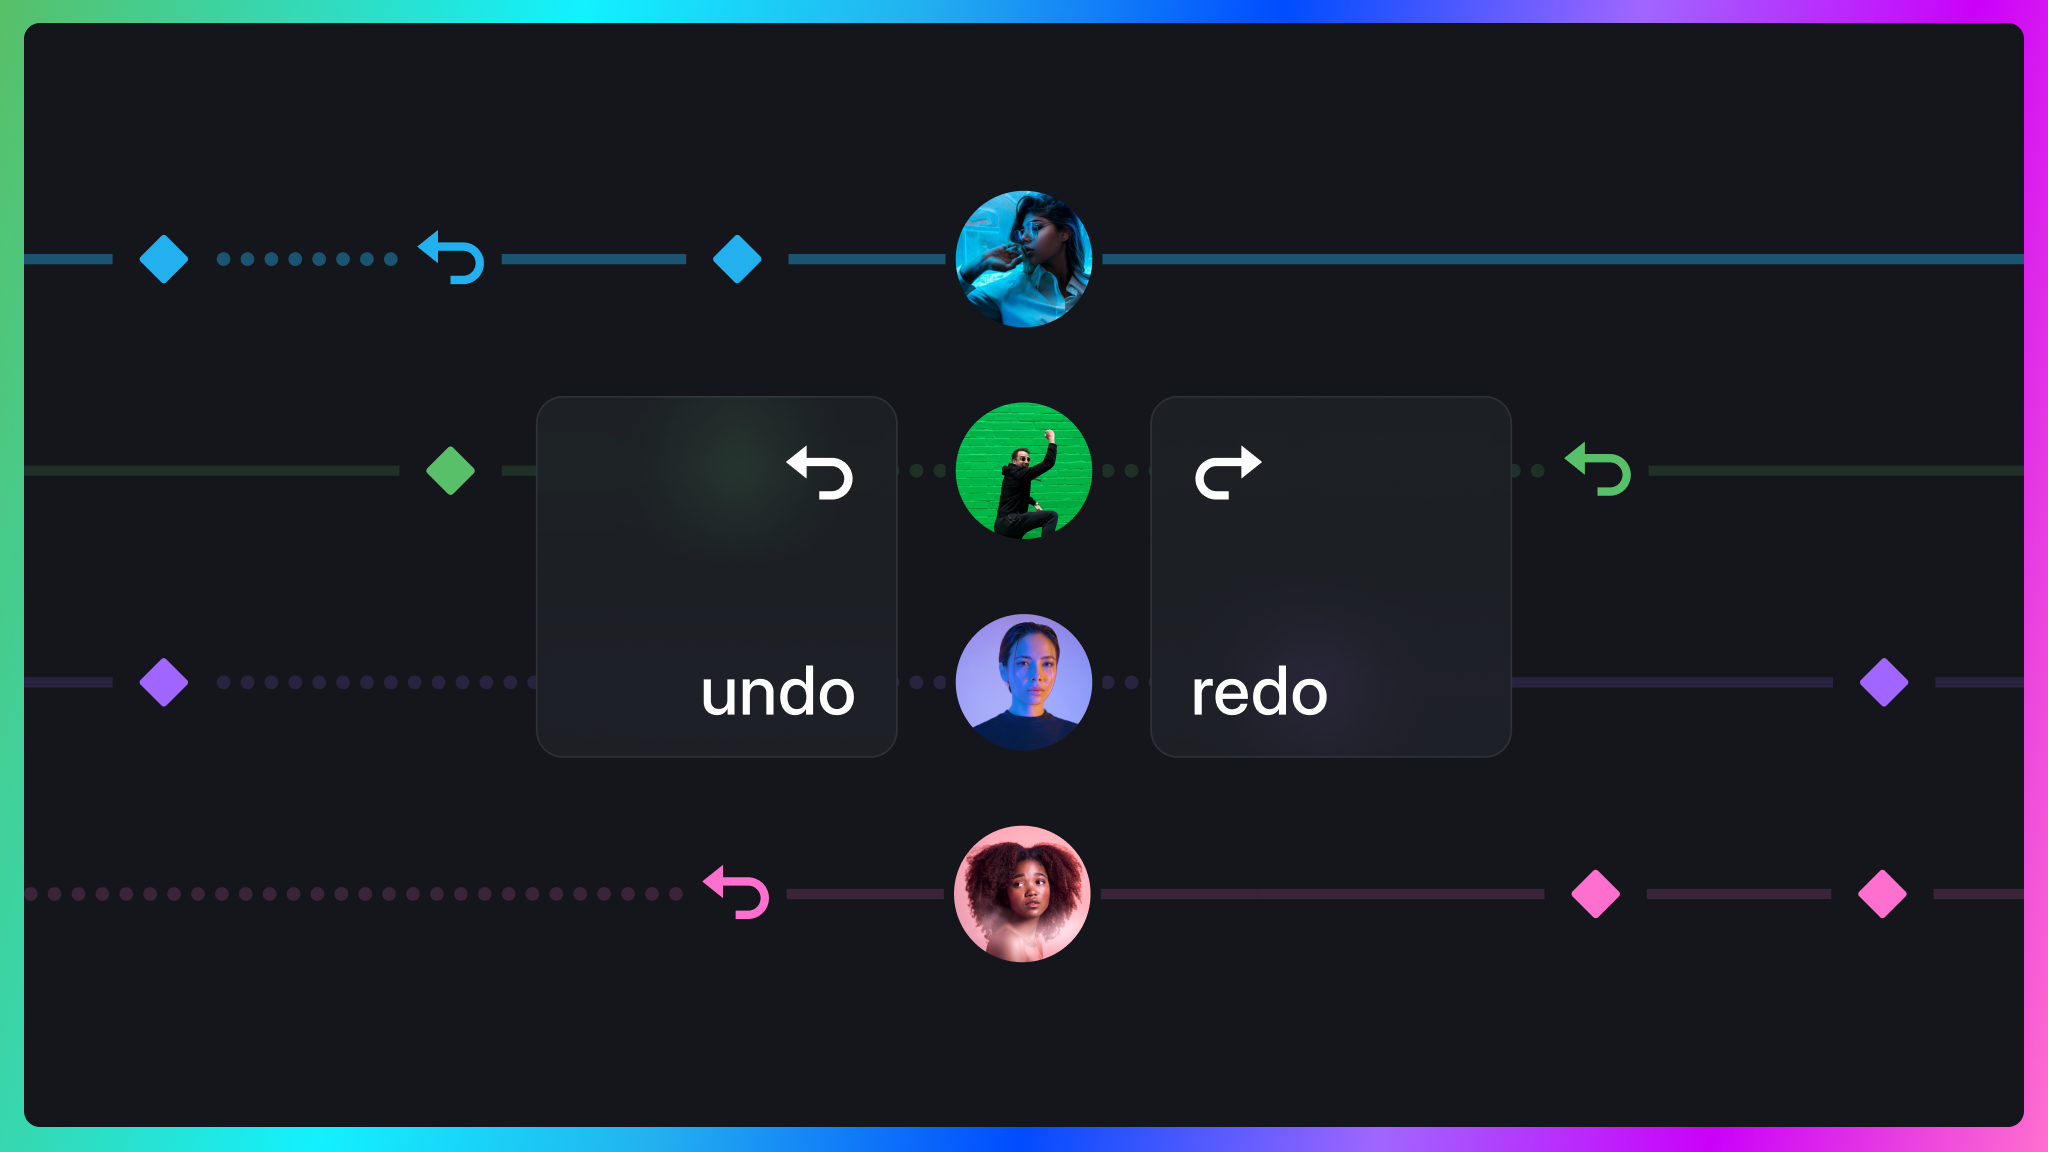 How to build undo/redo in a multiplayer environment